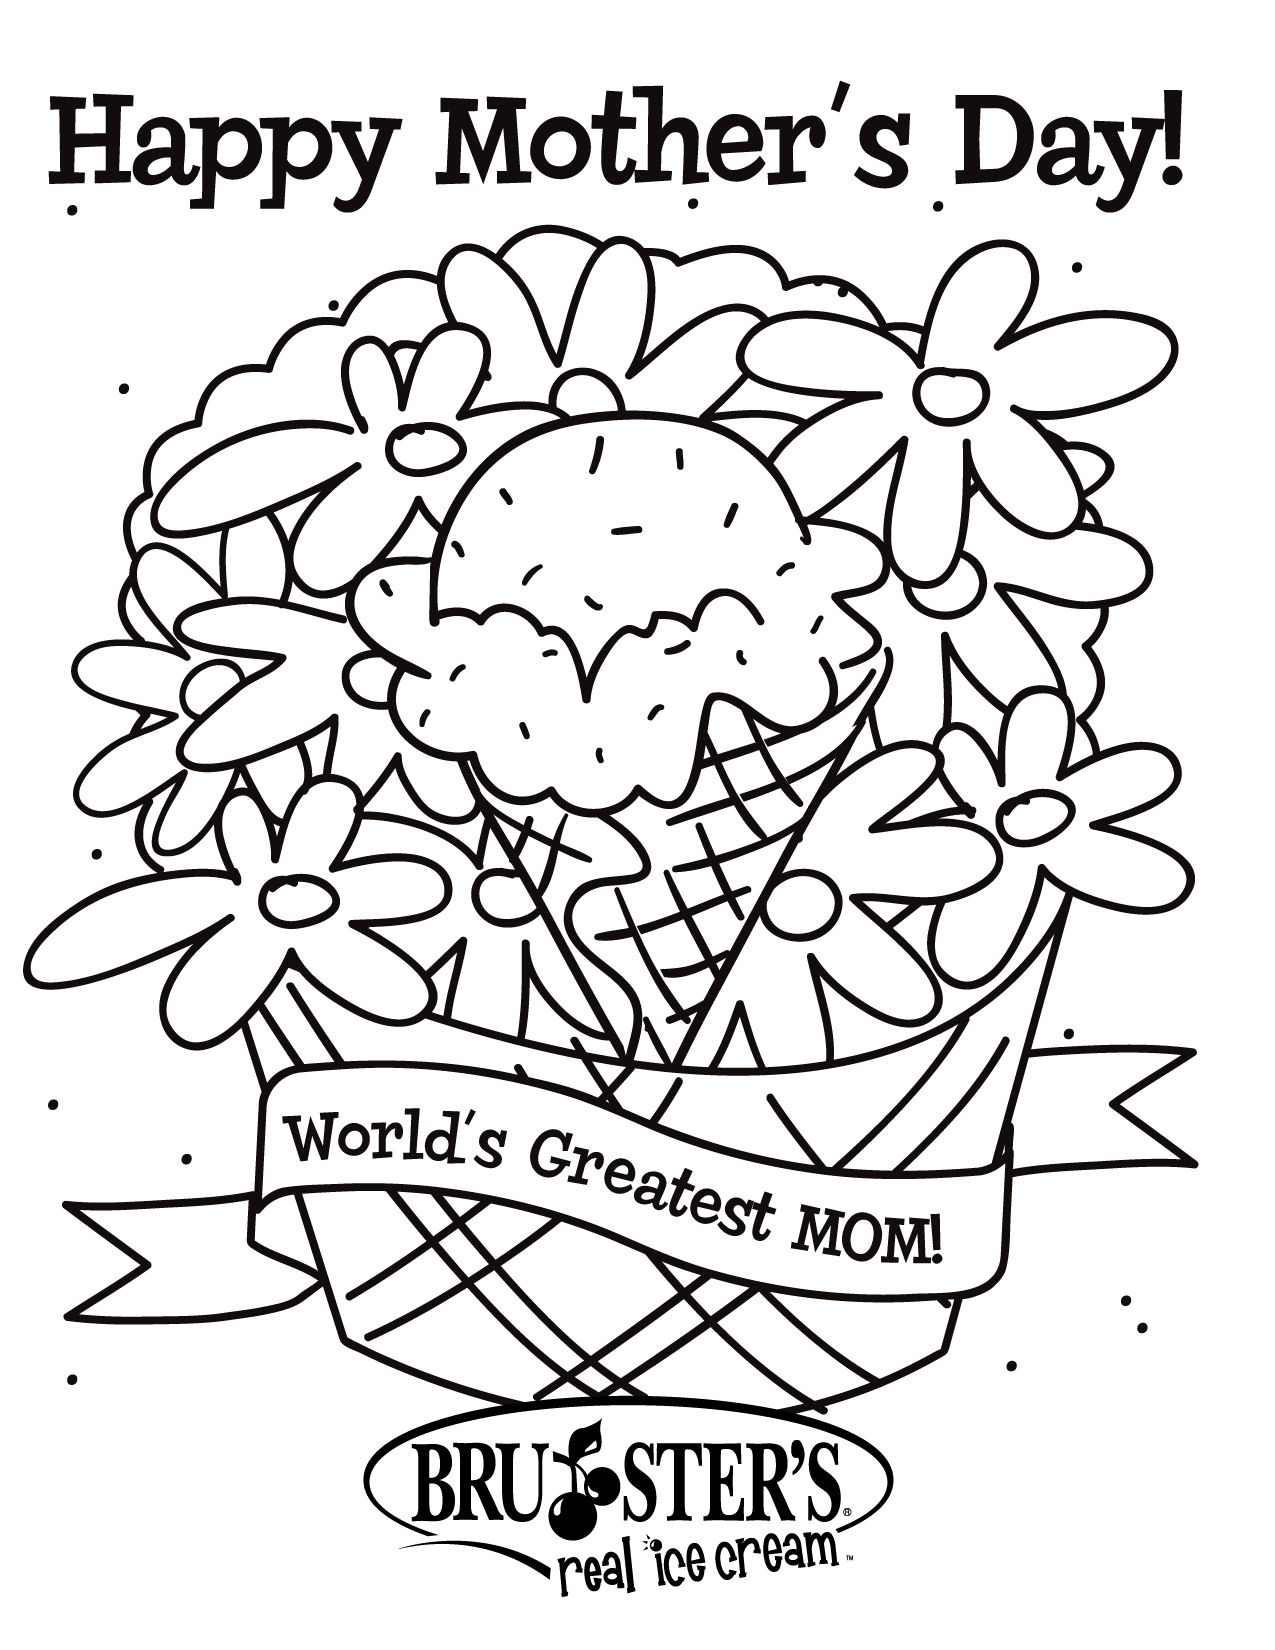 Free Printable Mothers Day Coloring Pages For Kids | Coloring - Free Printable Mothers Day Coloring Pages